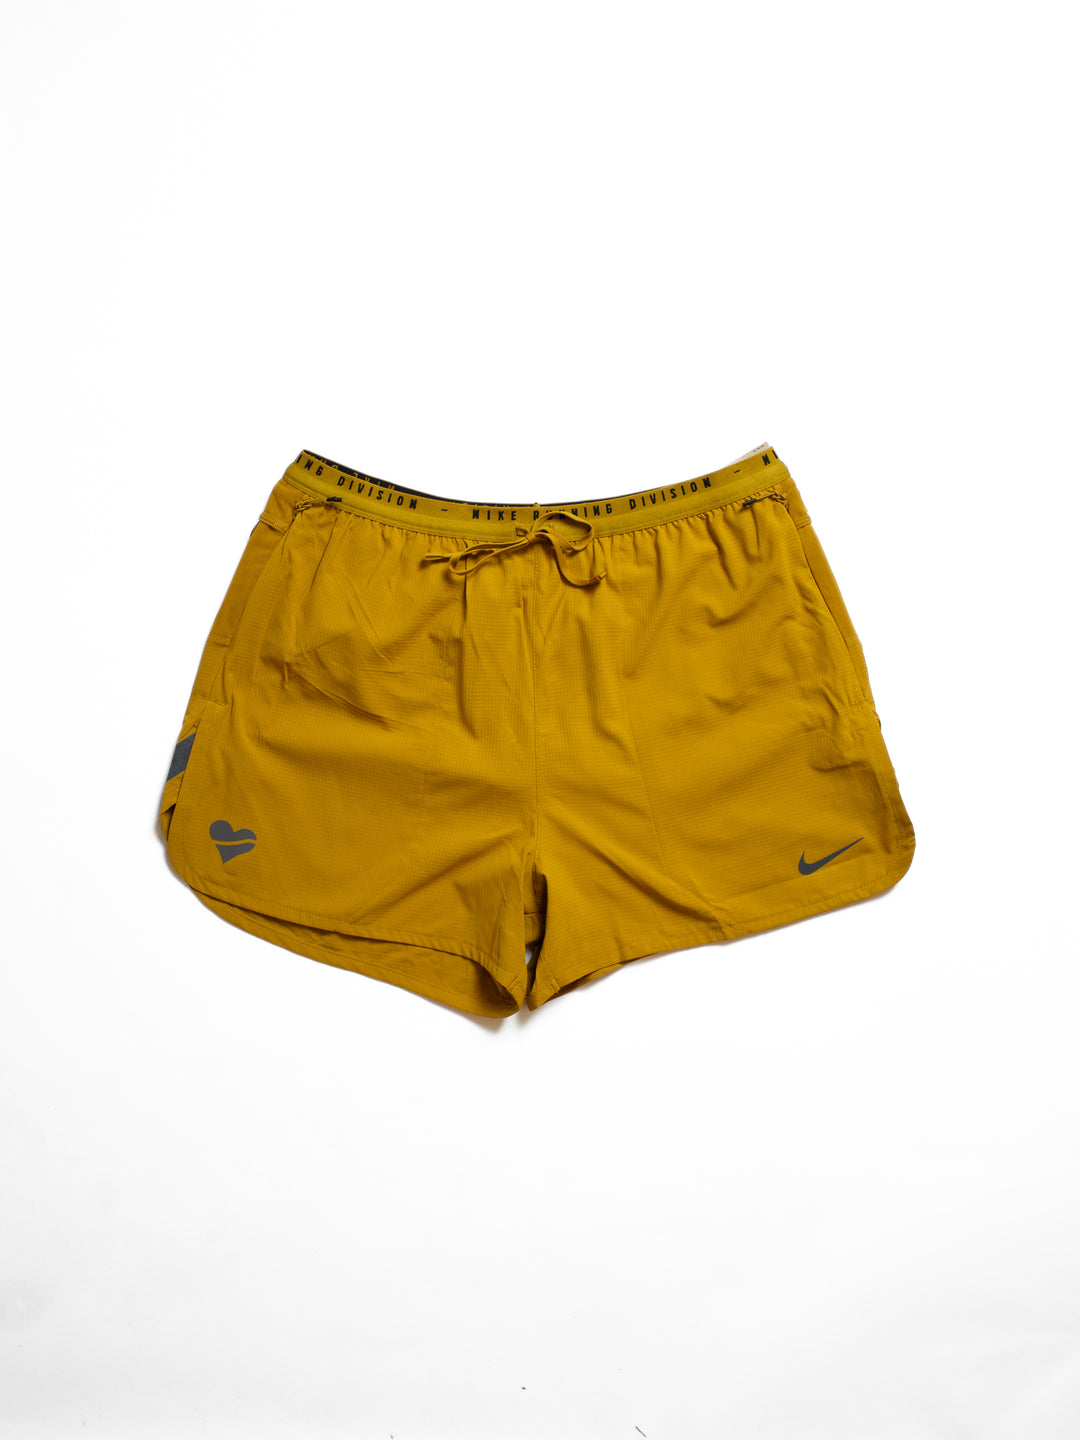 Nike Orange and Yellow Athletic Shorts Small - $15 - From Bethany